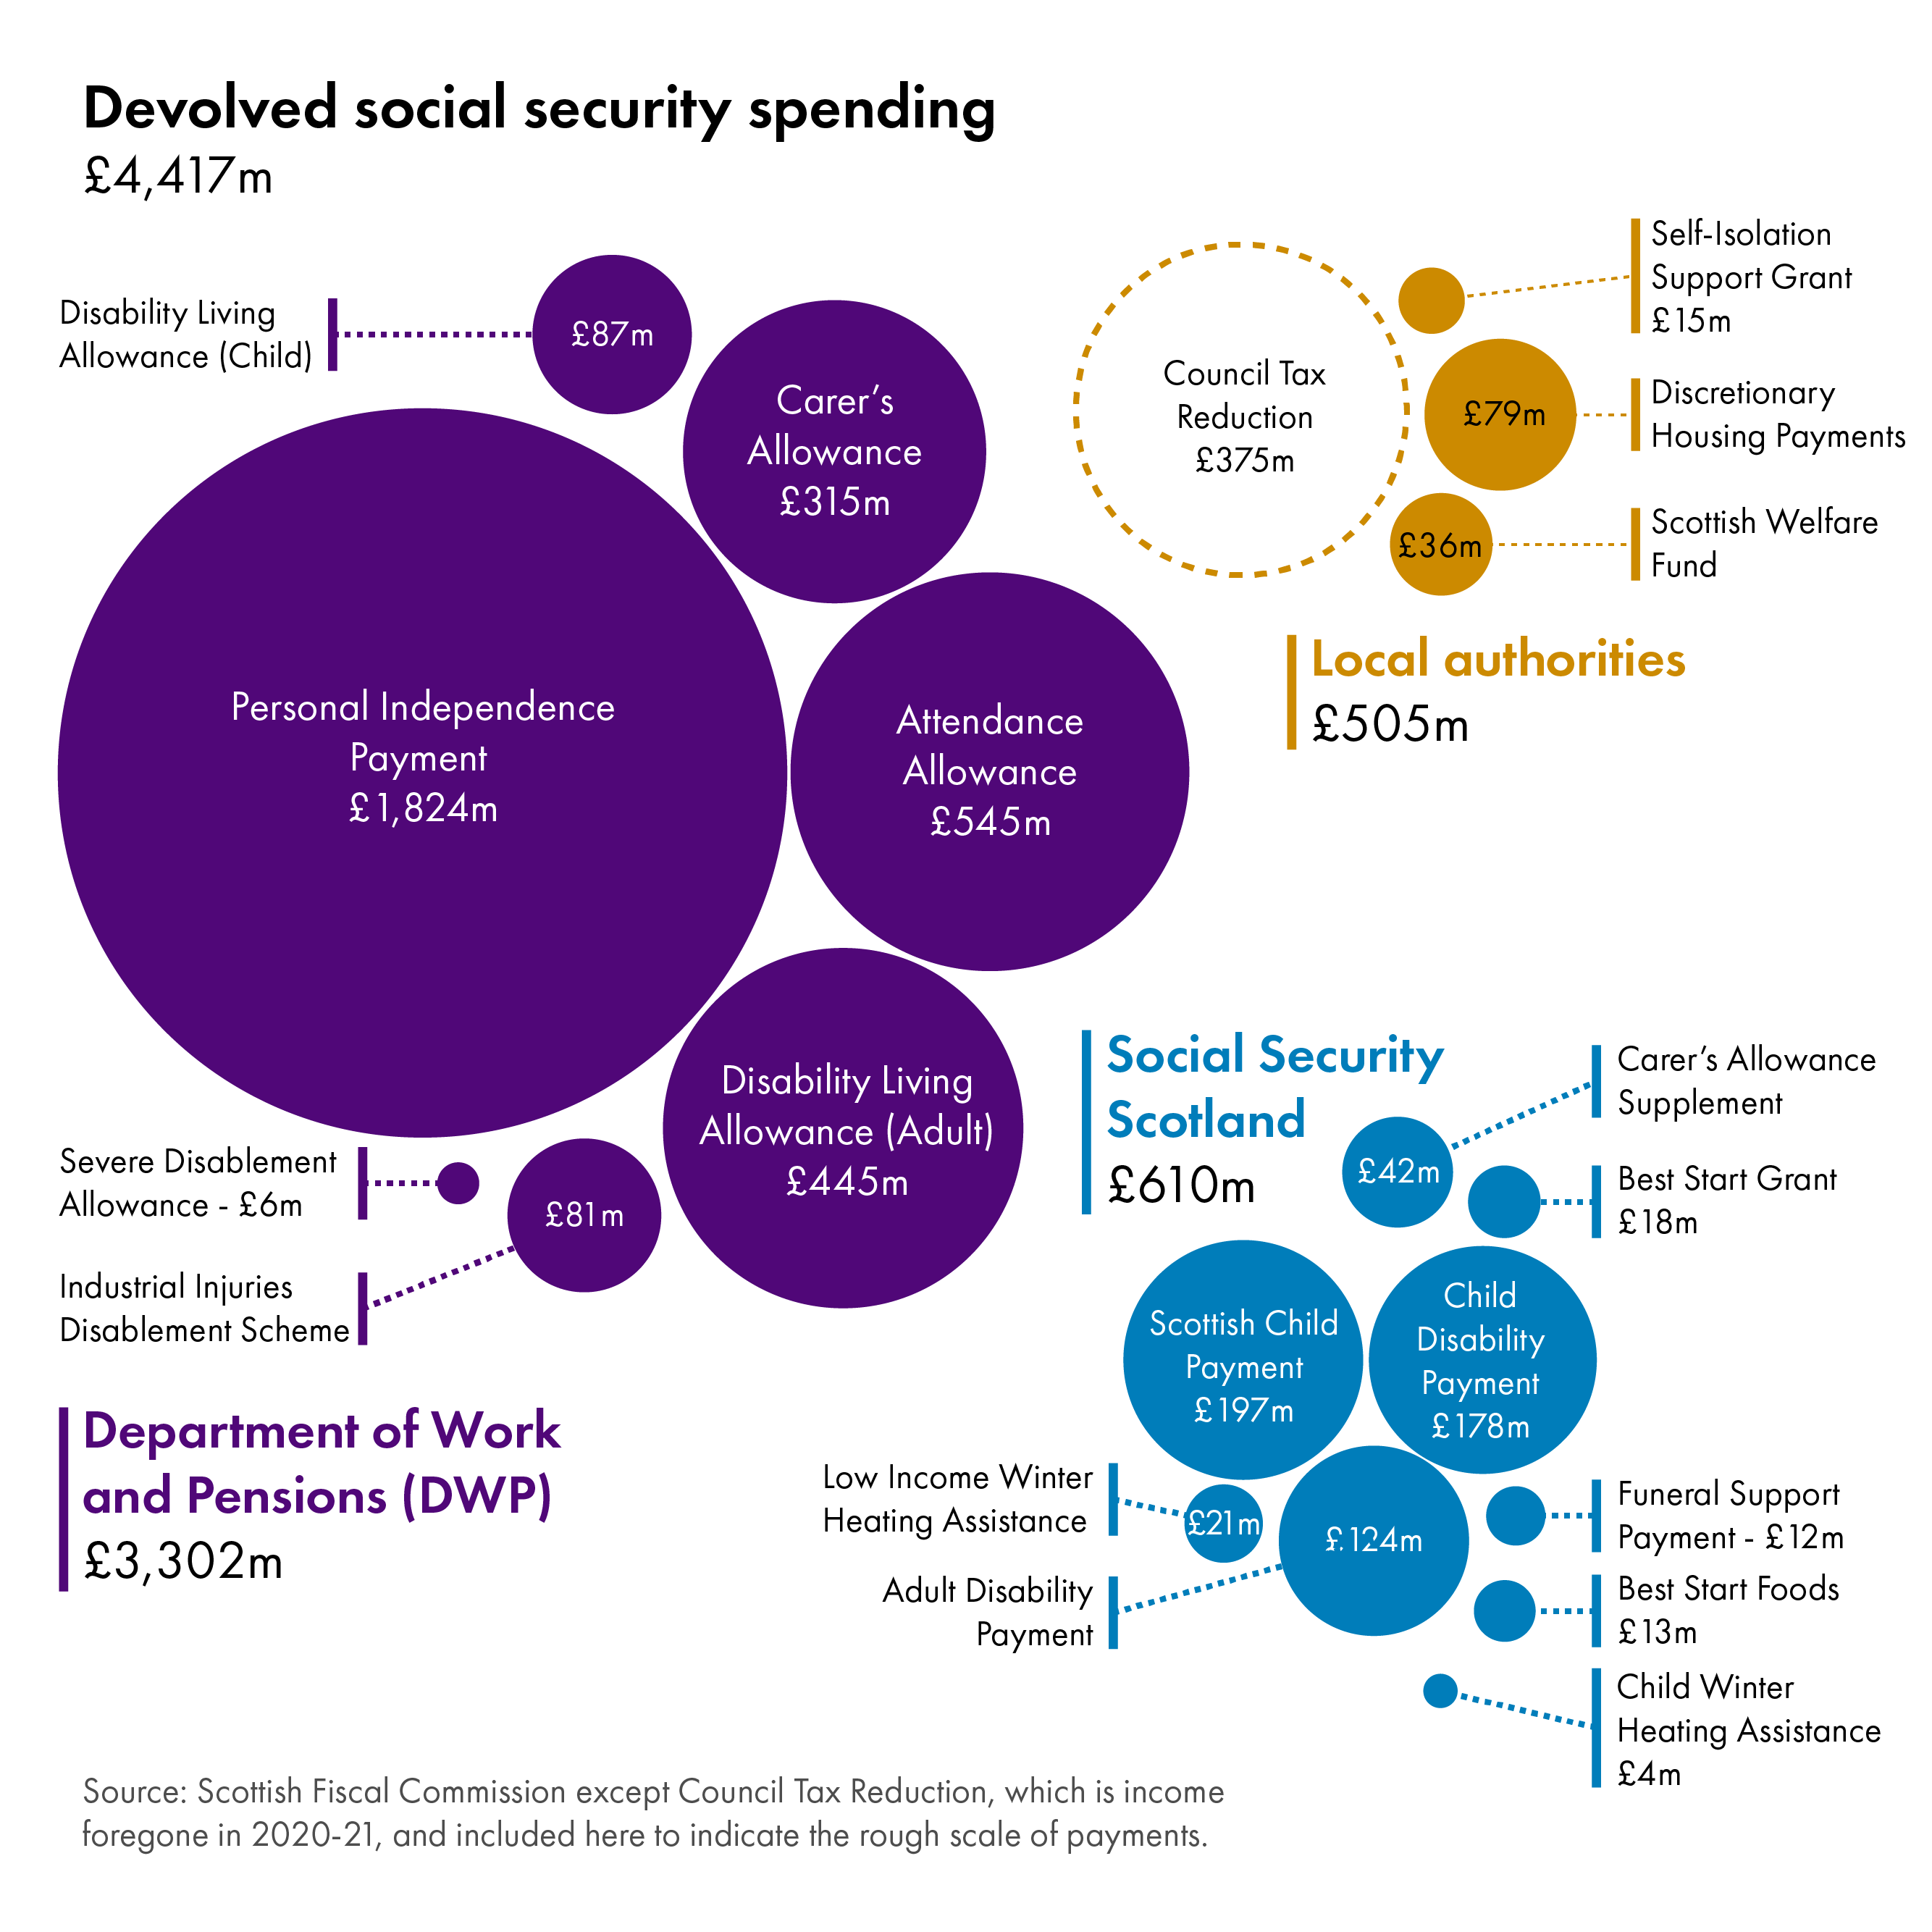 Figure 5 shows the various Social Security powers now devolved to the Scottish Parliament by size. The DWP funds £3.3 billion of spending, including PIP, attendance allowance and Disability Living Allowance. Social Security Scotland funds £610 million of spending, of which the Scottish Child Payment and Child Disability Payment are the largest.